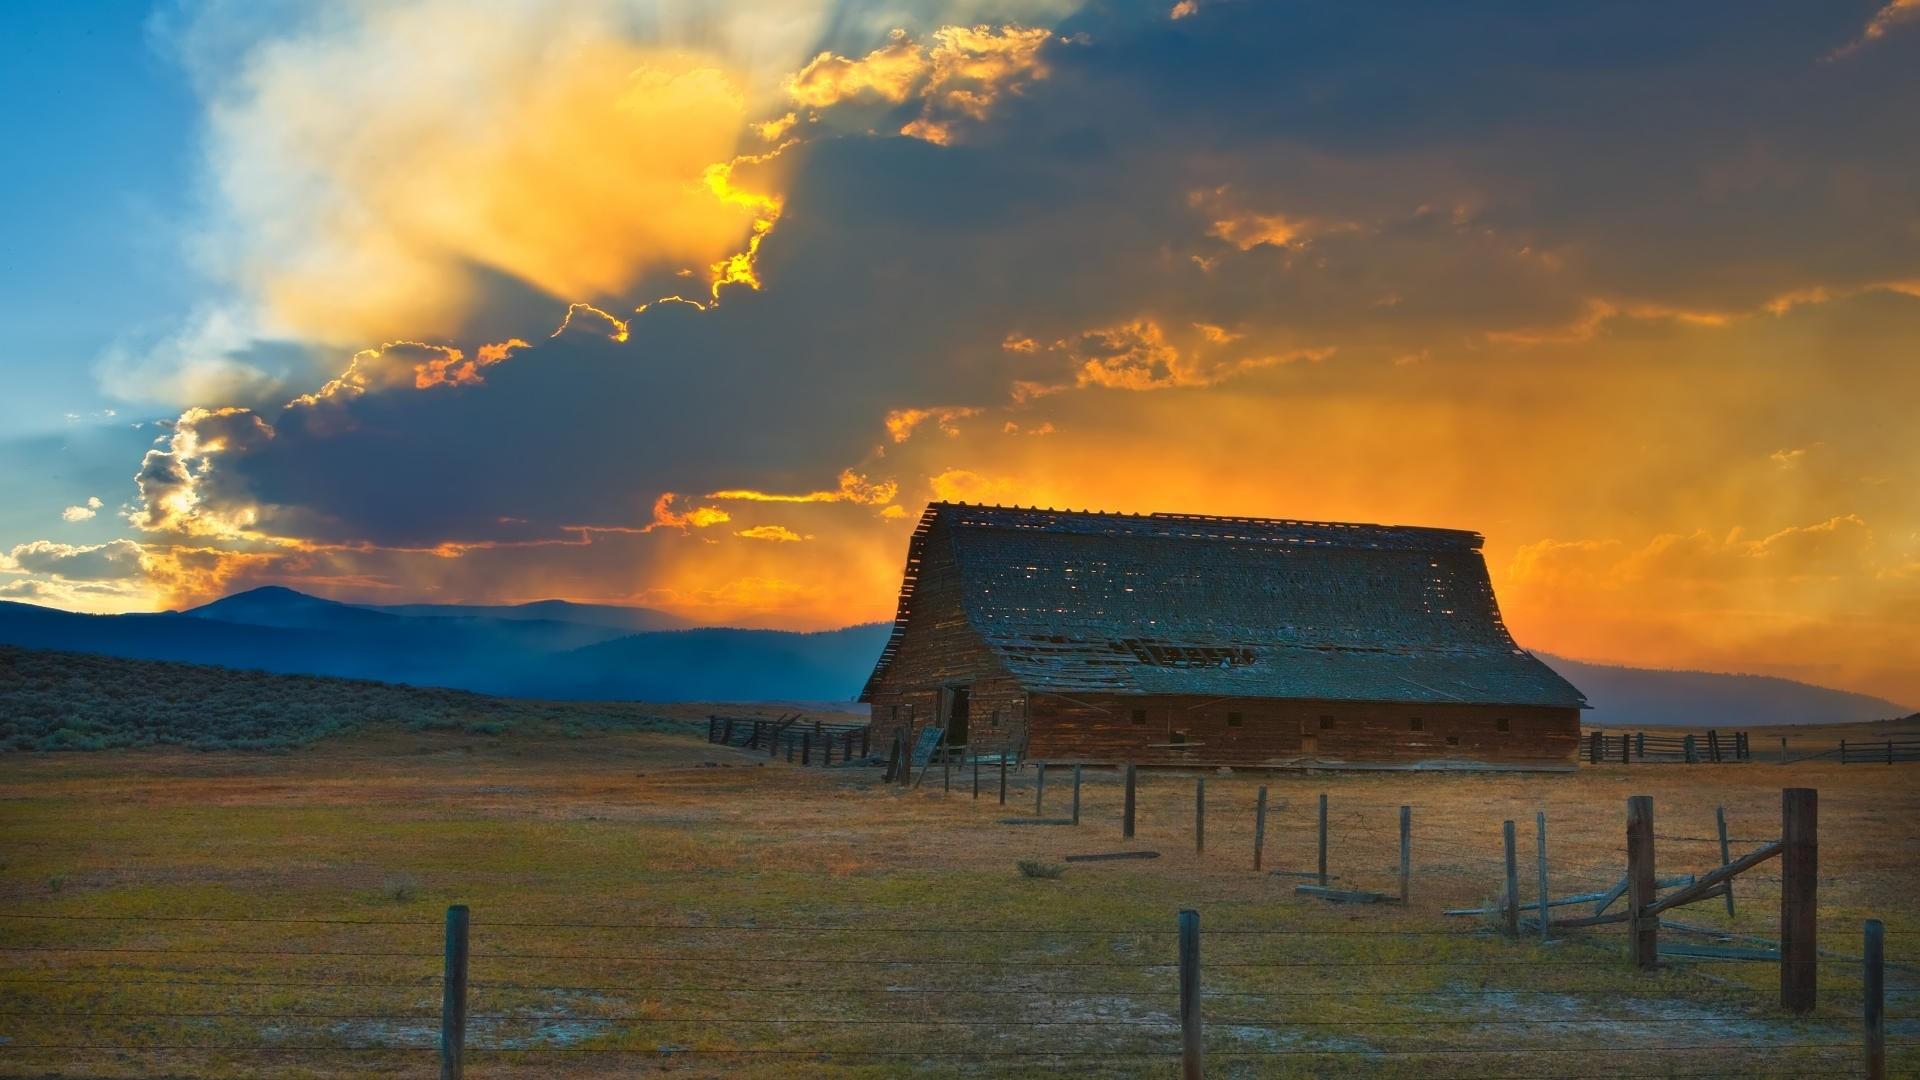 HD Glorious Sunset Over Old Barn Wallpaper Background